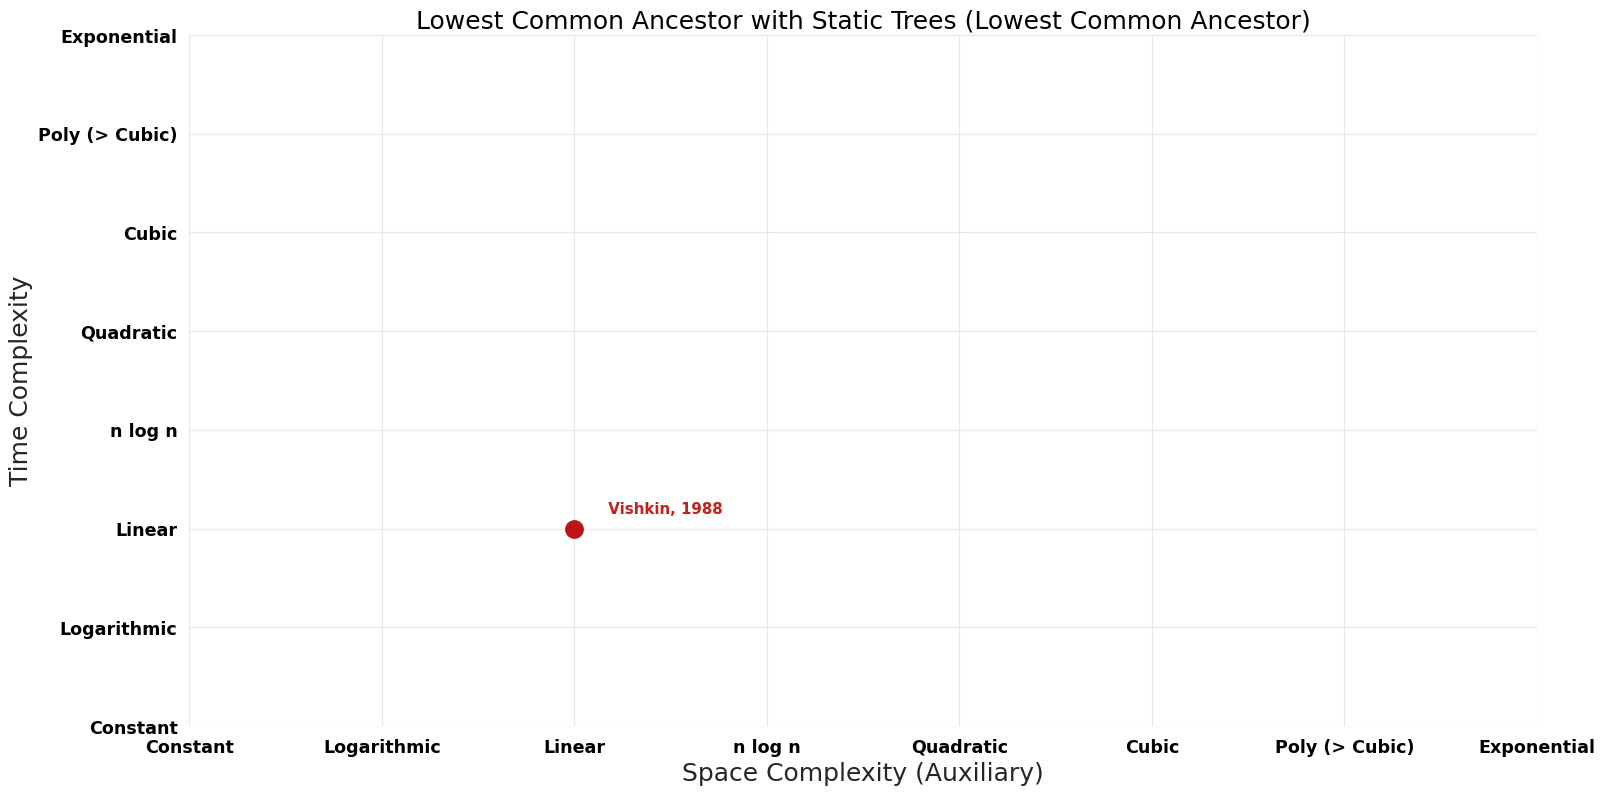 Lowest Common Ancestor - Lowest Common Ancestor with Static Trees - Pareto Frontier.png